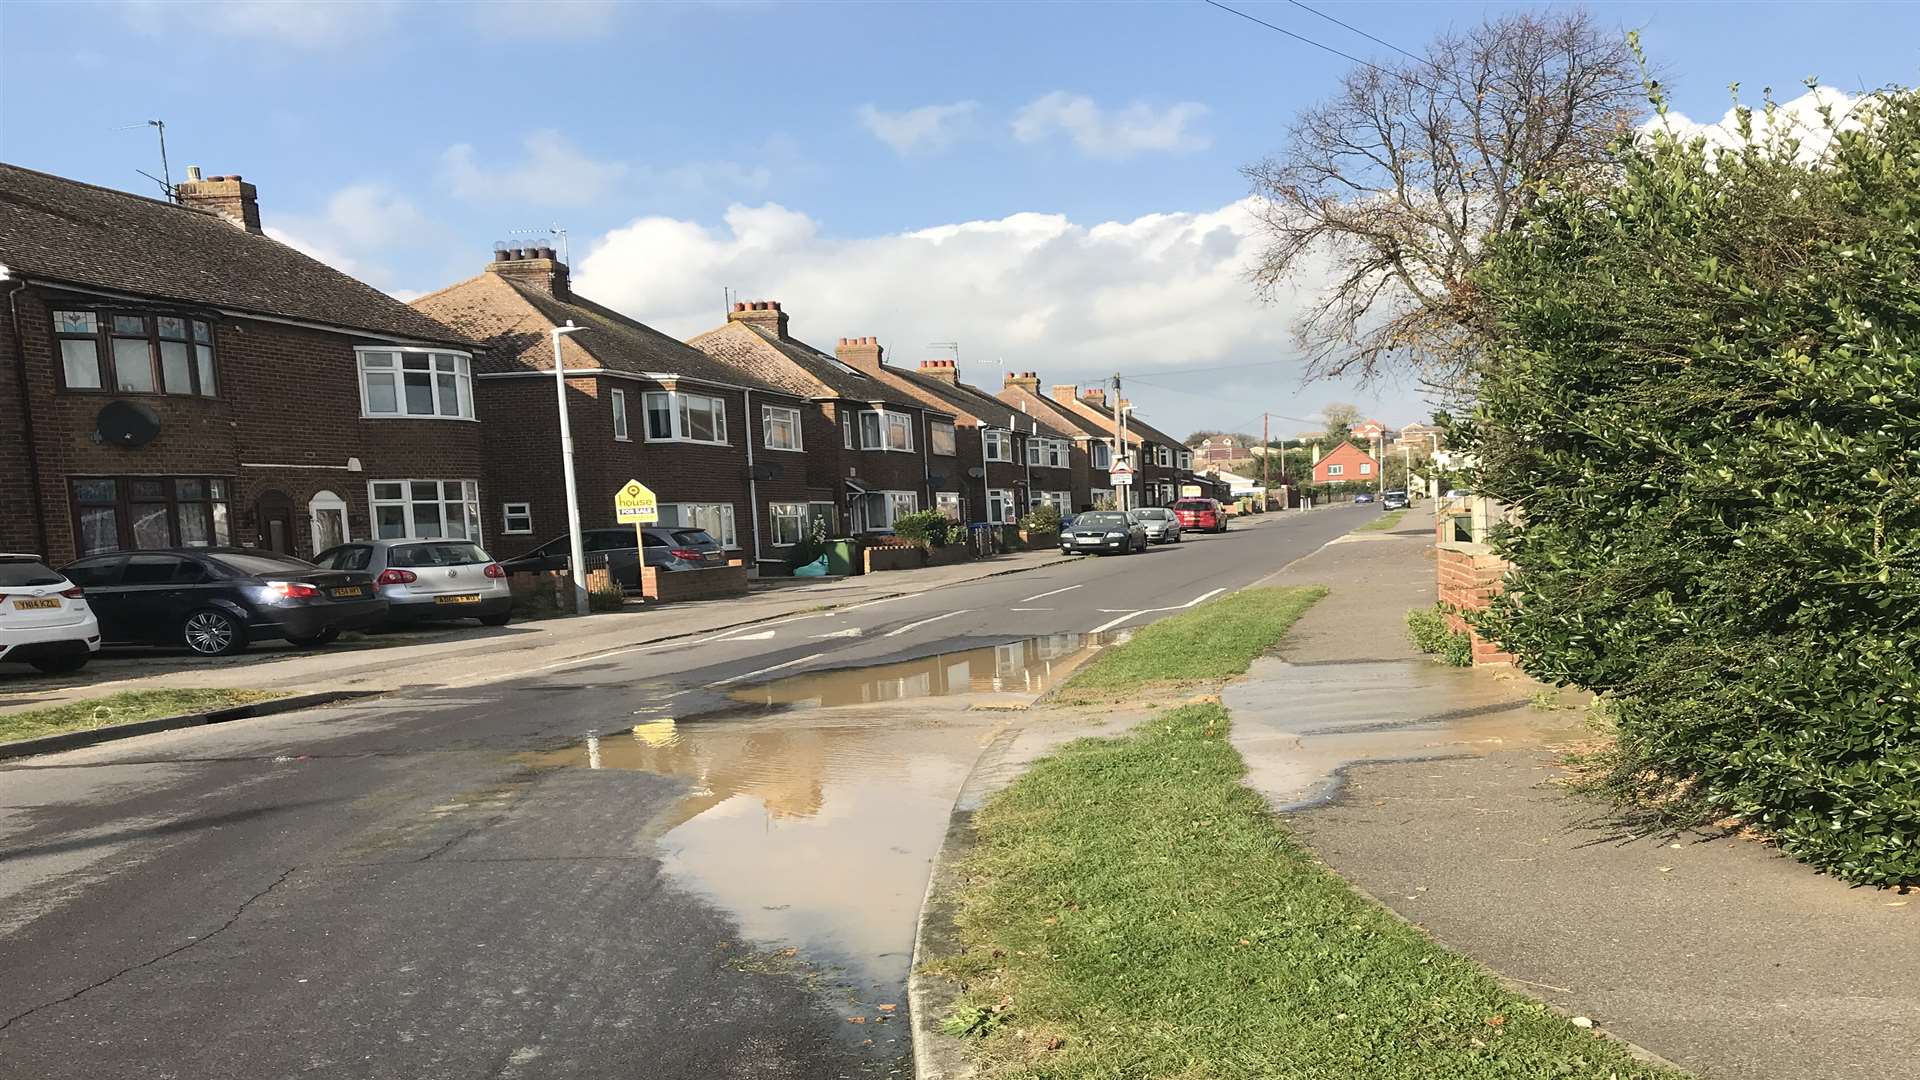 The water main has burst in Harps Avenue, Minster.